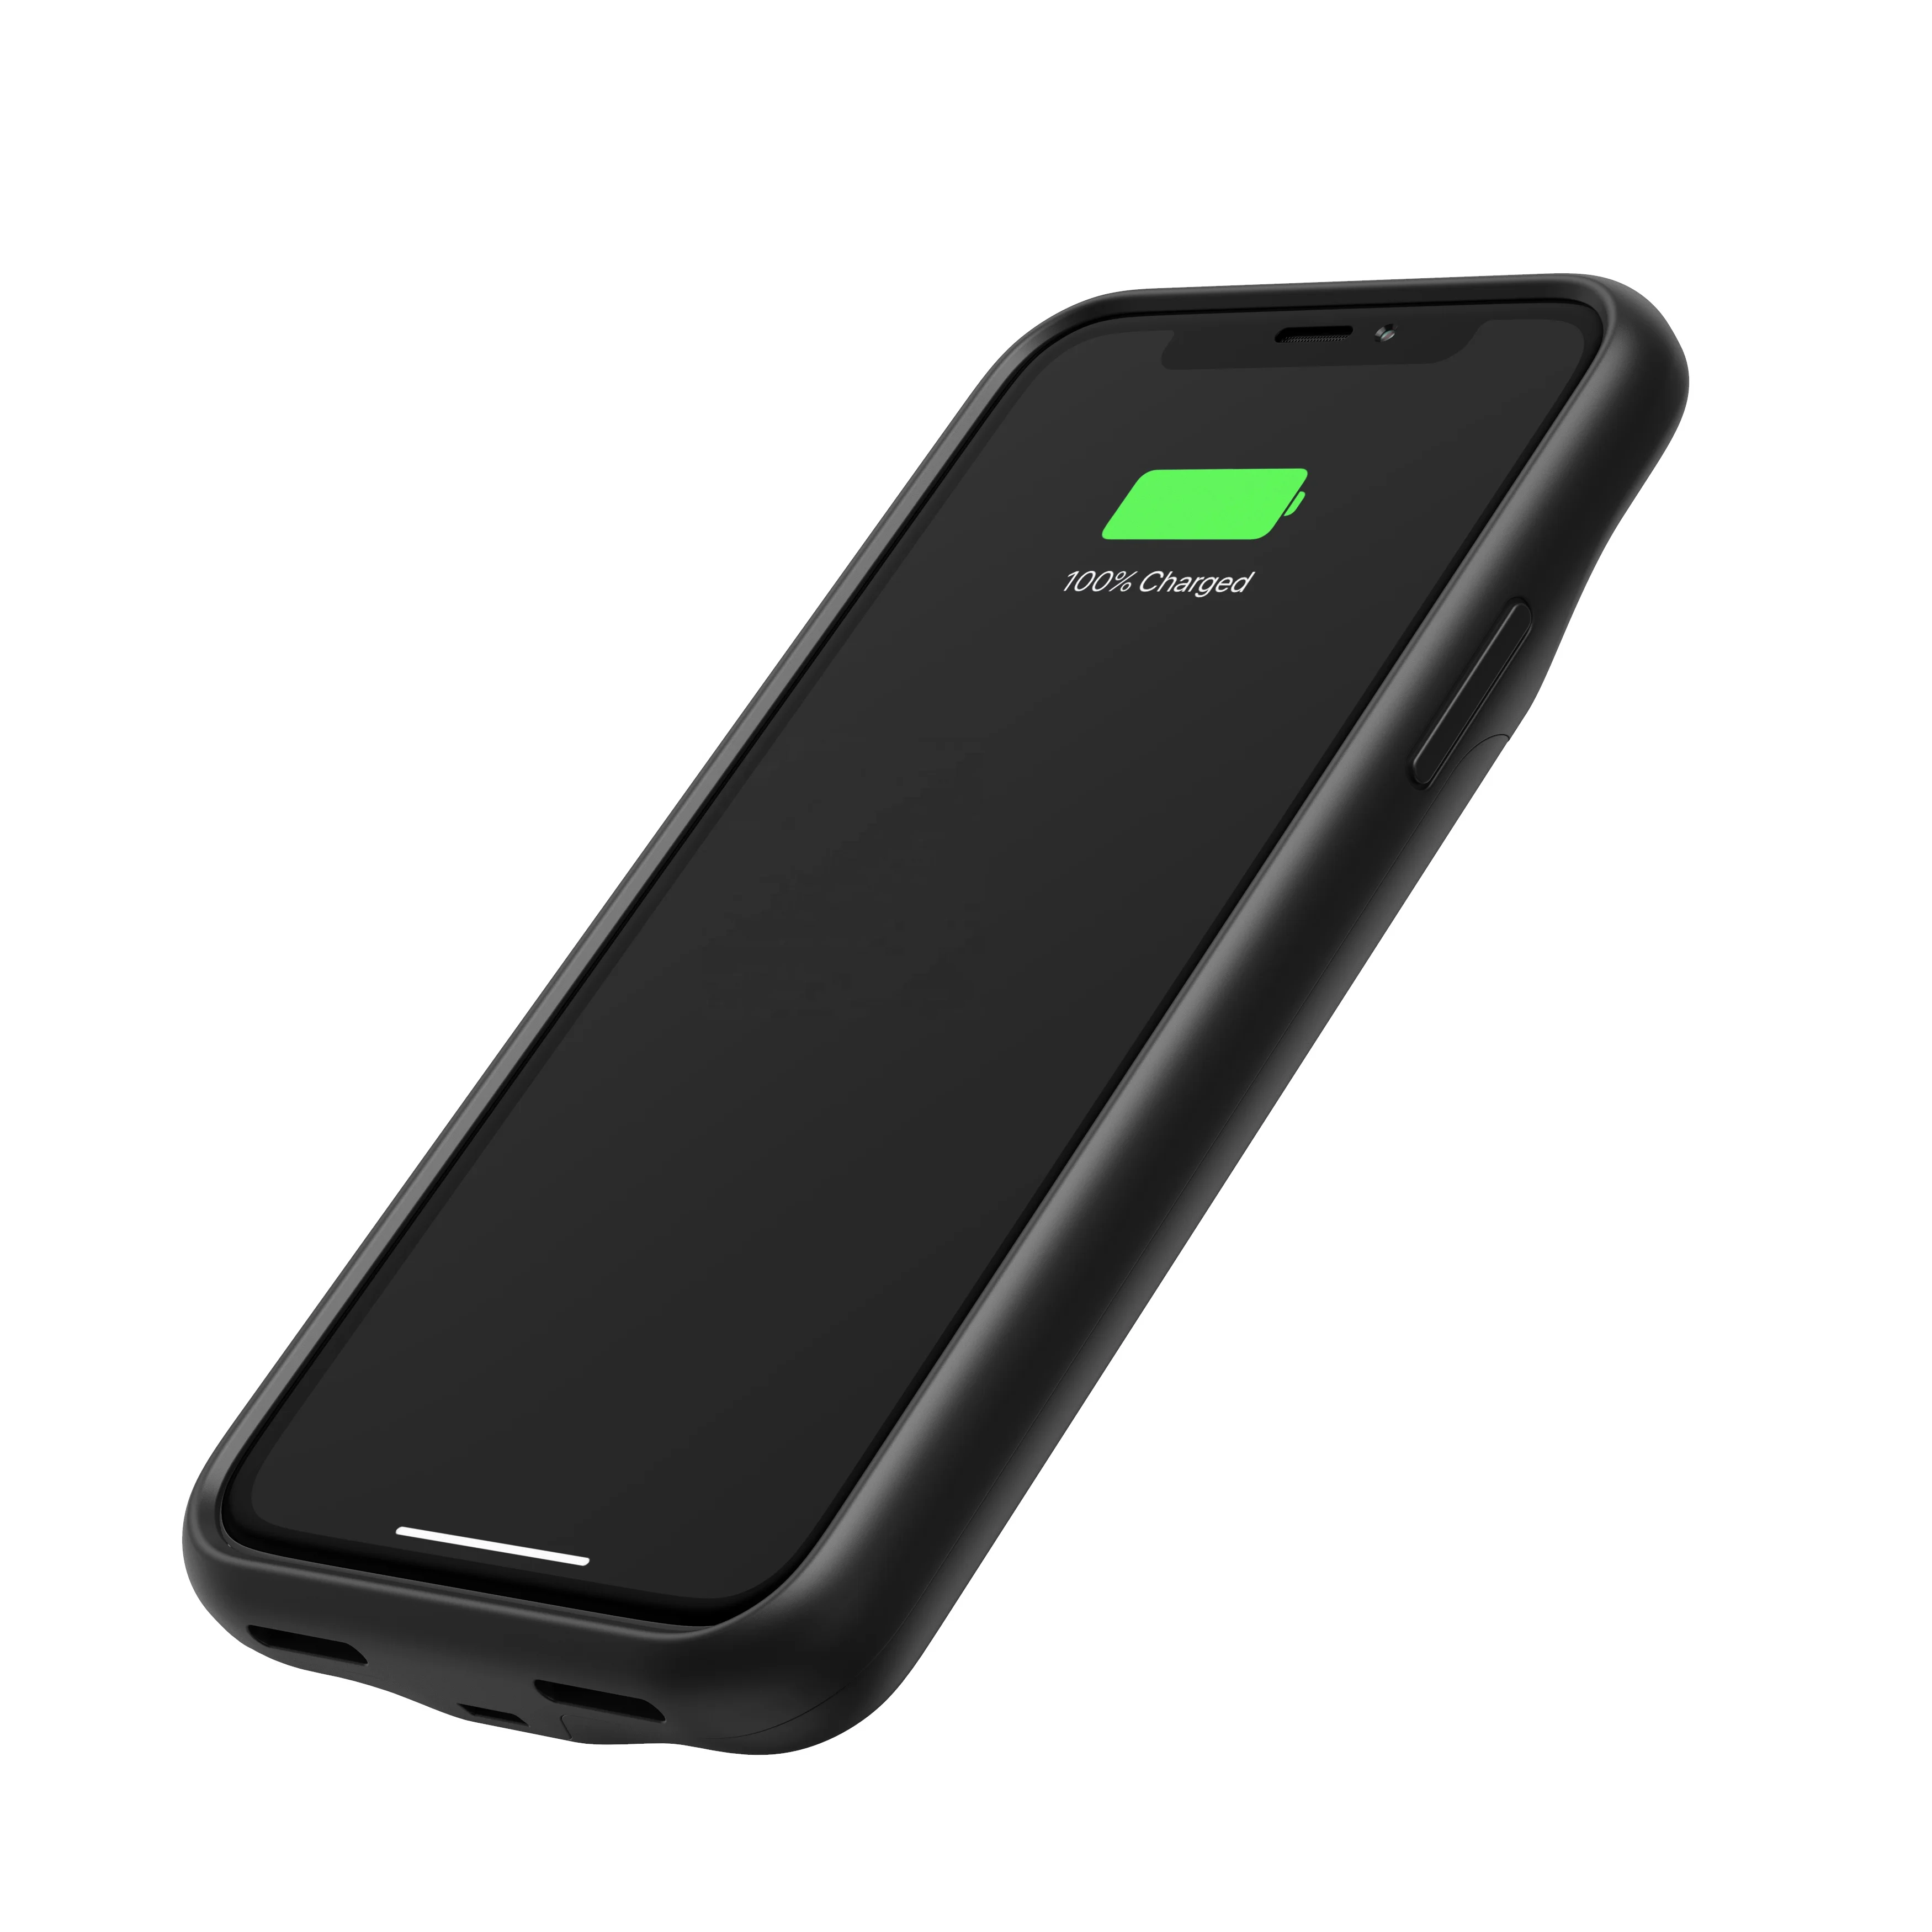 
2020 New Design Hot sale 3500 mAh wireless charging phone Battery Case for iphone X/XR /11/ 11pro 